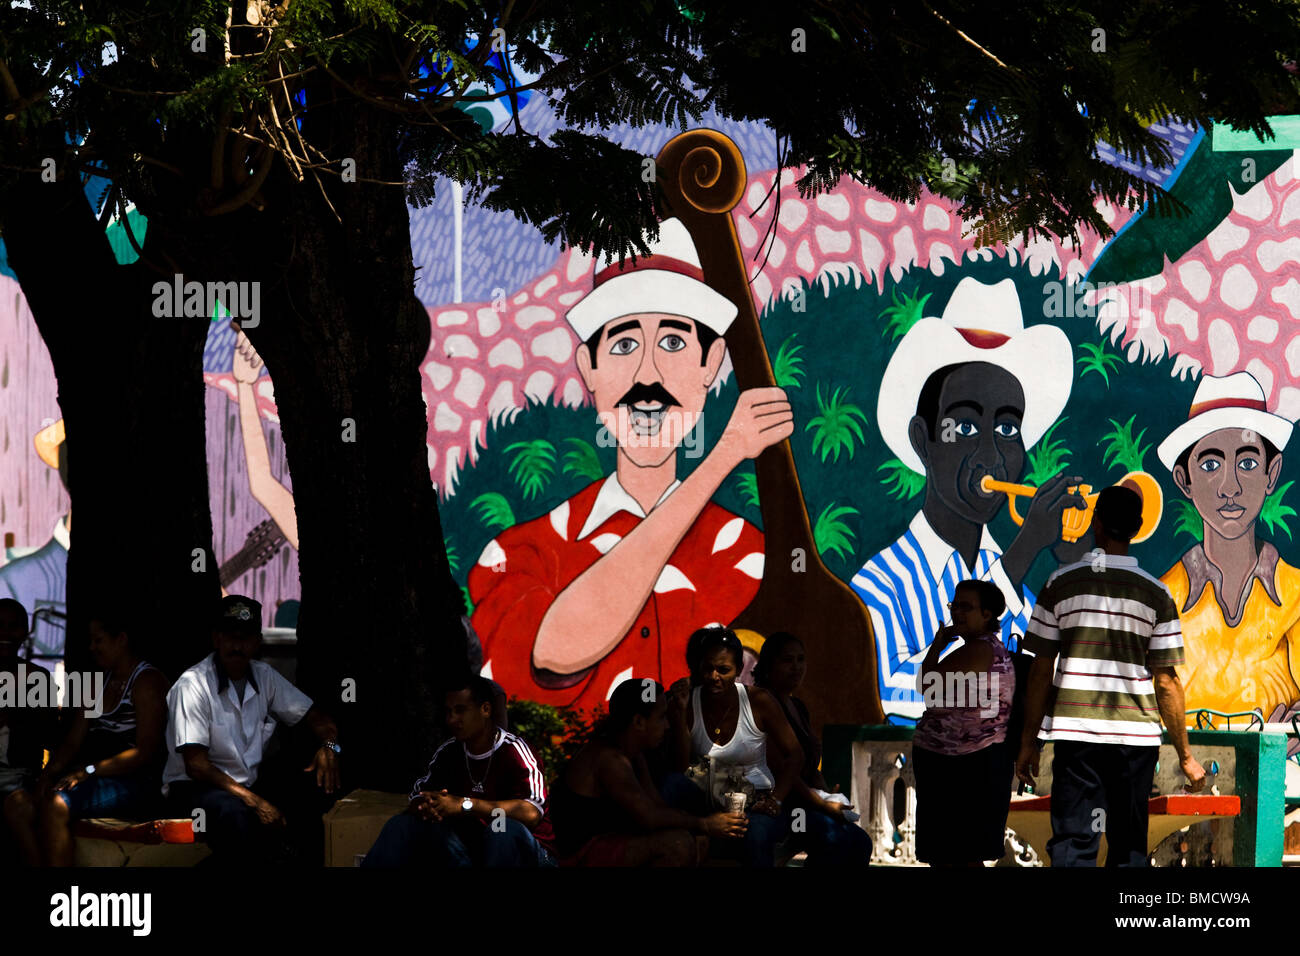 People sit in a park by a large mural depicting musicians in Baracoa, Cuba on Monday July 14, 2008. Stock Photo